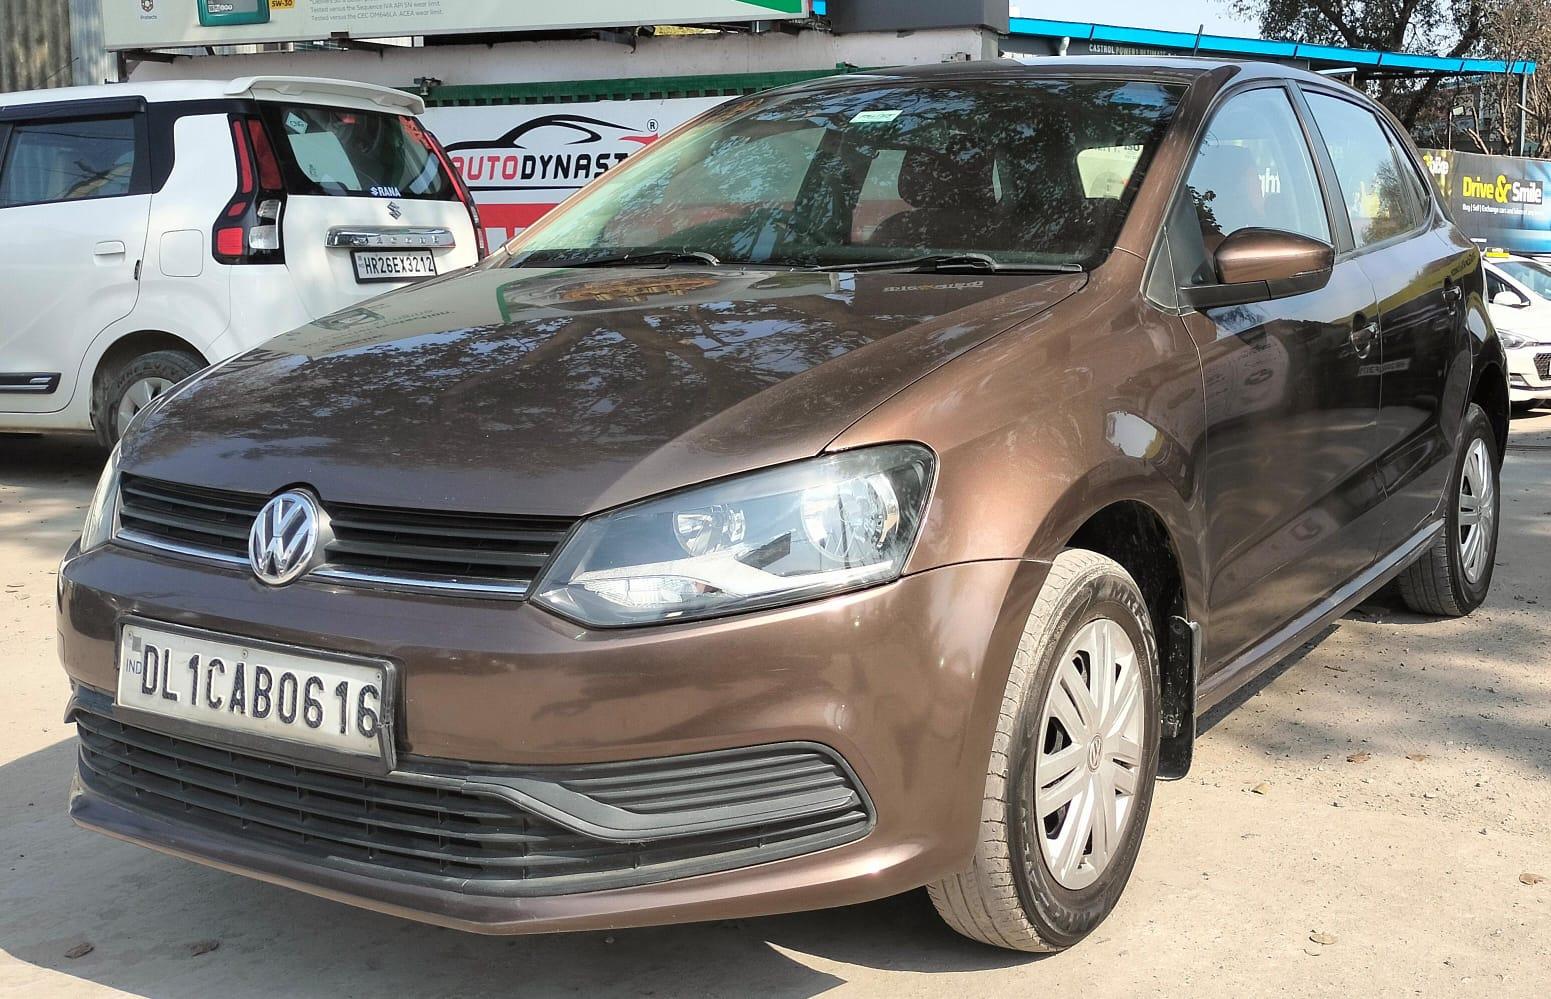 Used 2019 Volkswagen Polo, undefined